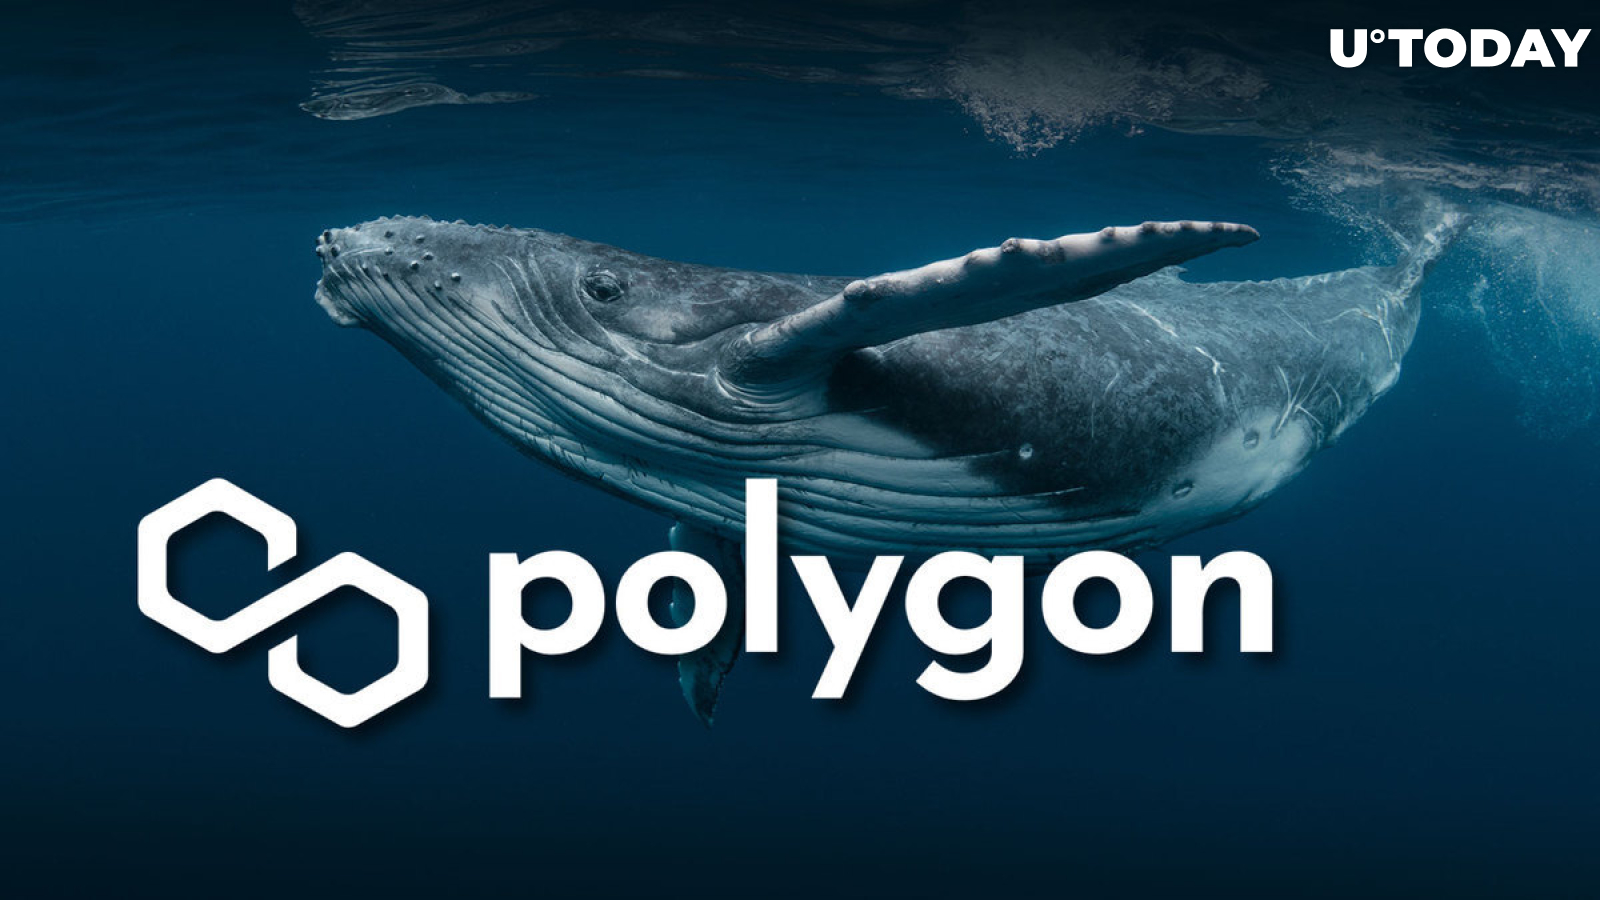 Polygon (MATIC) Whale Transactions up 49% as Recovery Is Underway